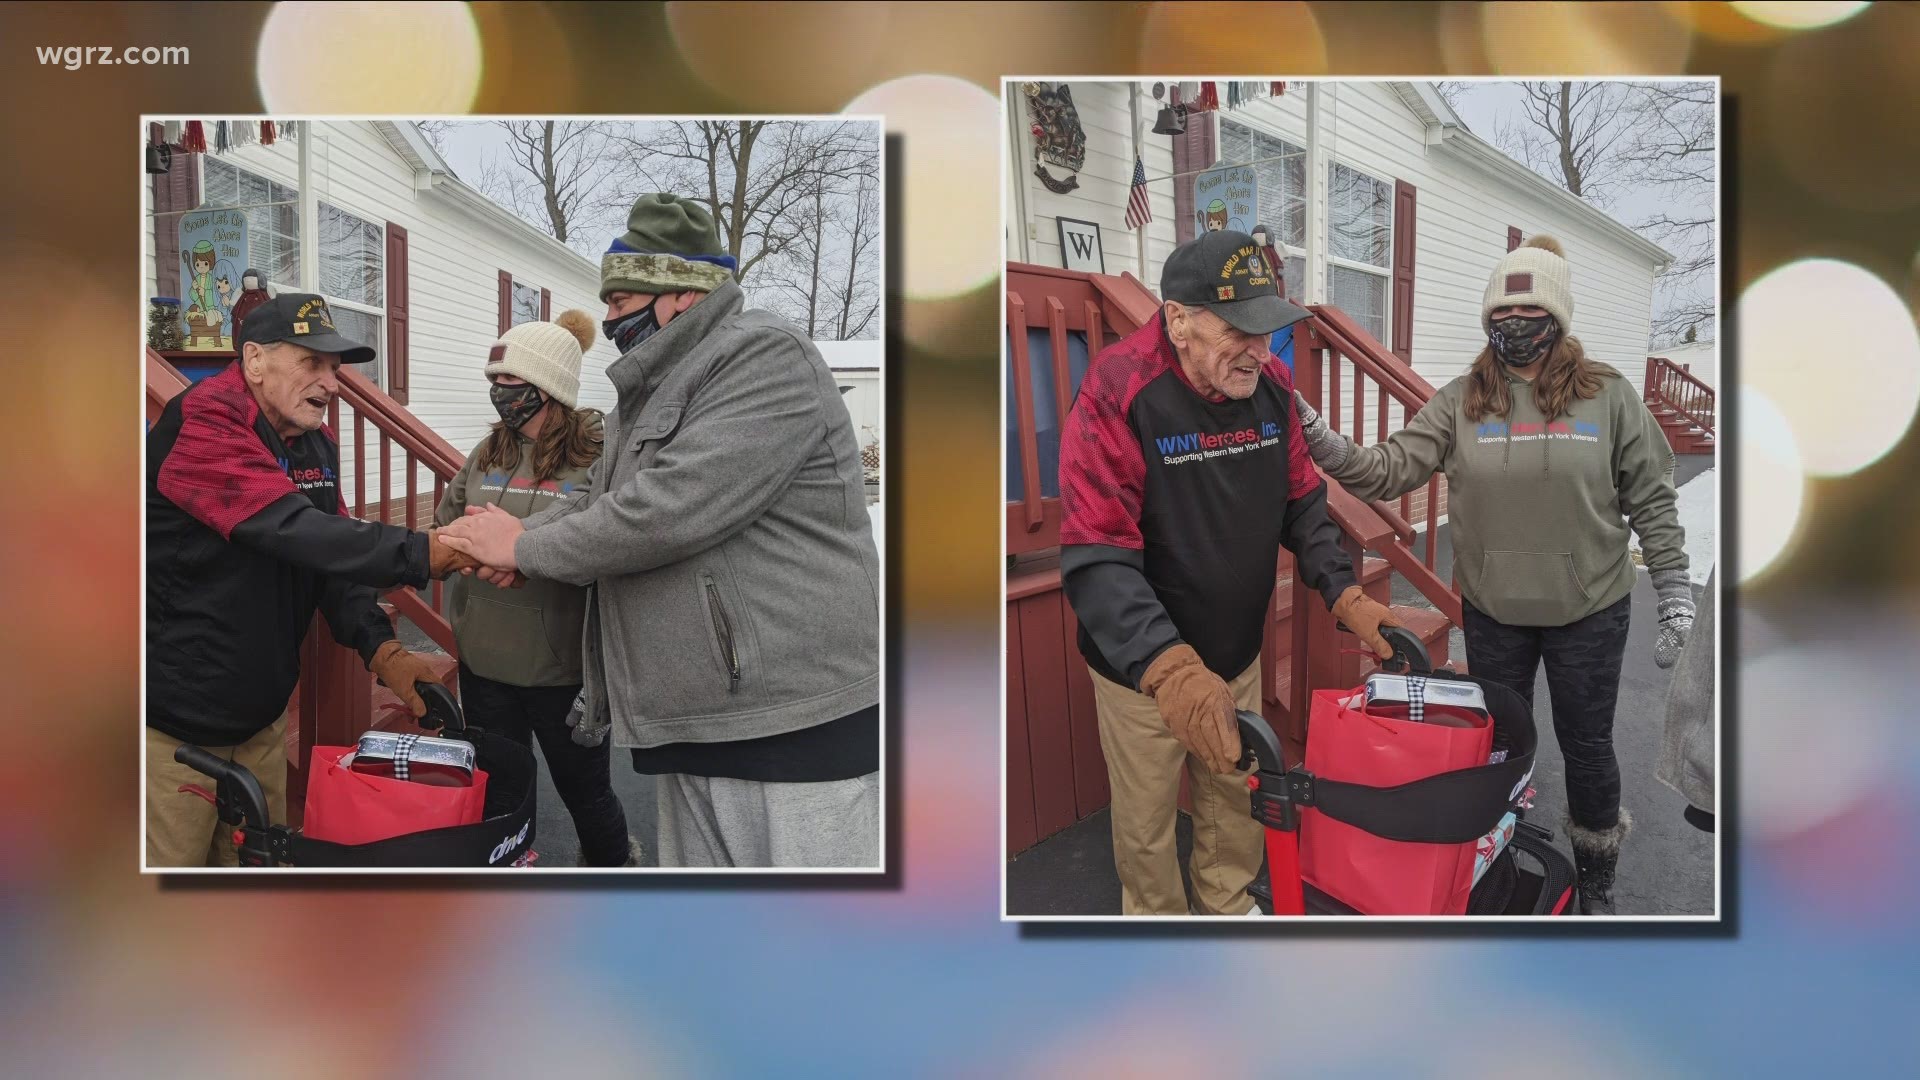 Organizations like Hope Rises and WNY Heroes are partnering to help make the season bright for local veterans.